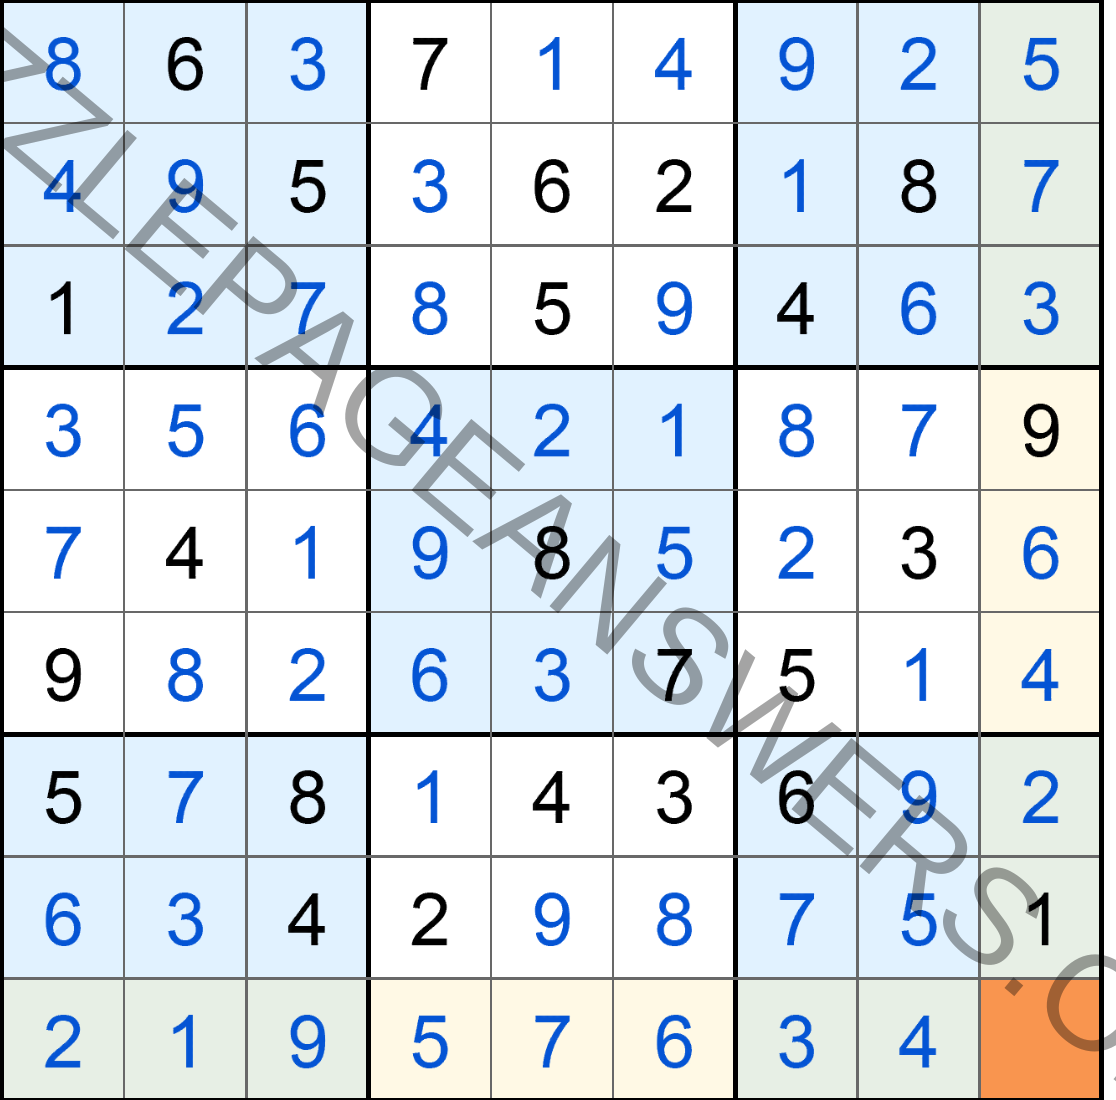 Puzzle Page Sudoku May 24 2020 Answers Puzzle Page Answers